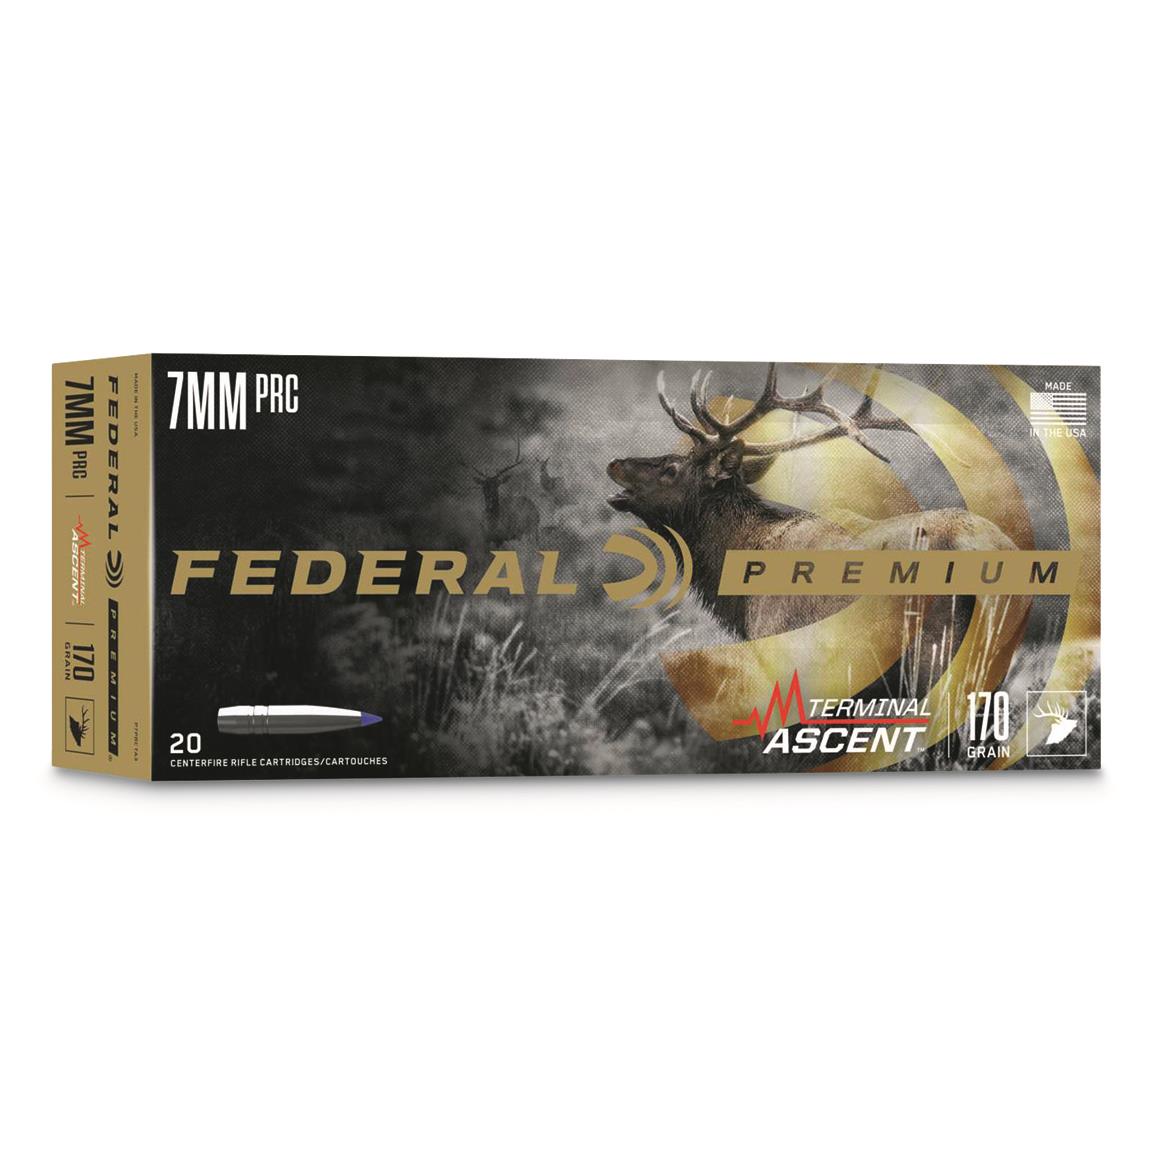 Federal Premium Terminal Ascent, 7mm PRC, Bonded Polymer Tip, 170 Grain, 20 Rounds